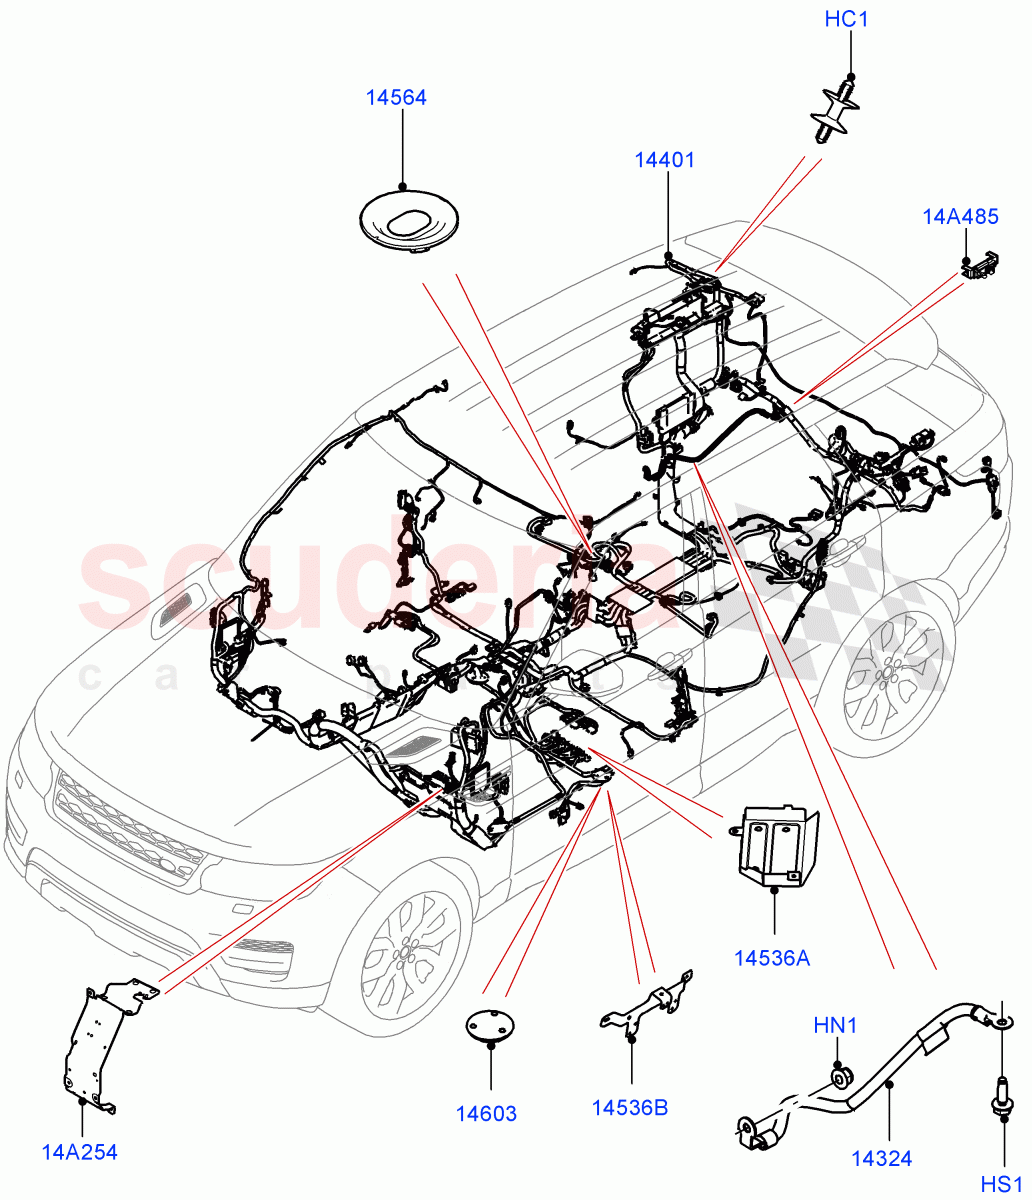 Electrical Wiring - Engine And Dash(Main Harness)((V)FROMFA000001,(V)TOFA999999) of Land Rover Land Rover Range Rover Sport (2014+) [3.0 Diesel 24V DOHC TC]